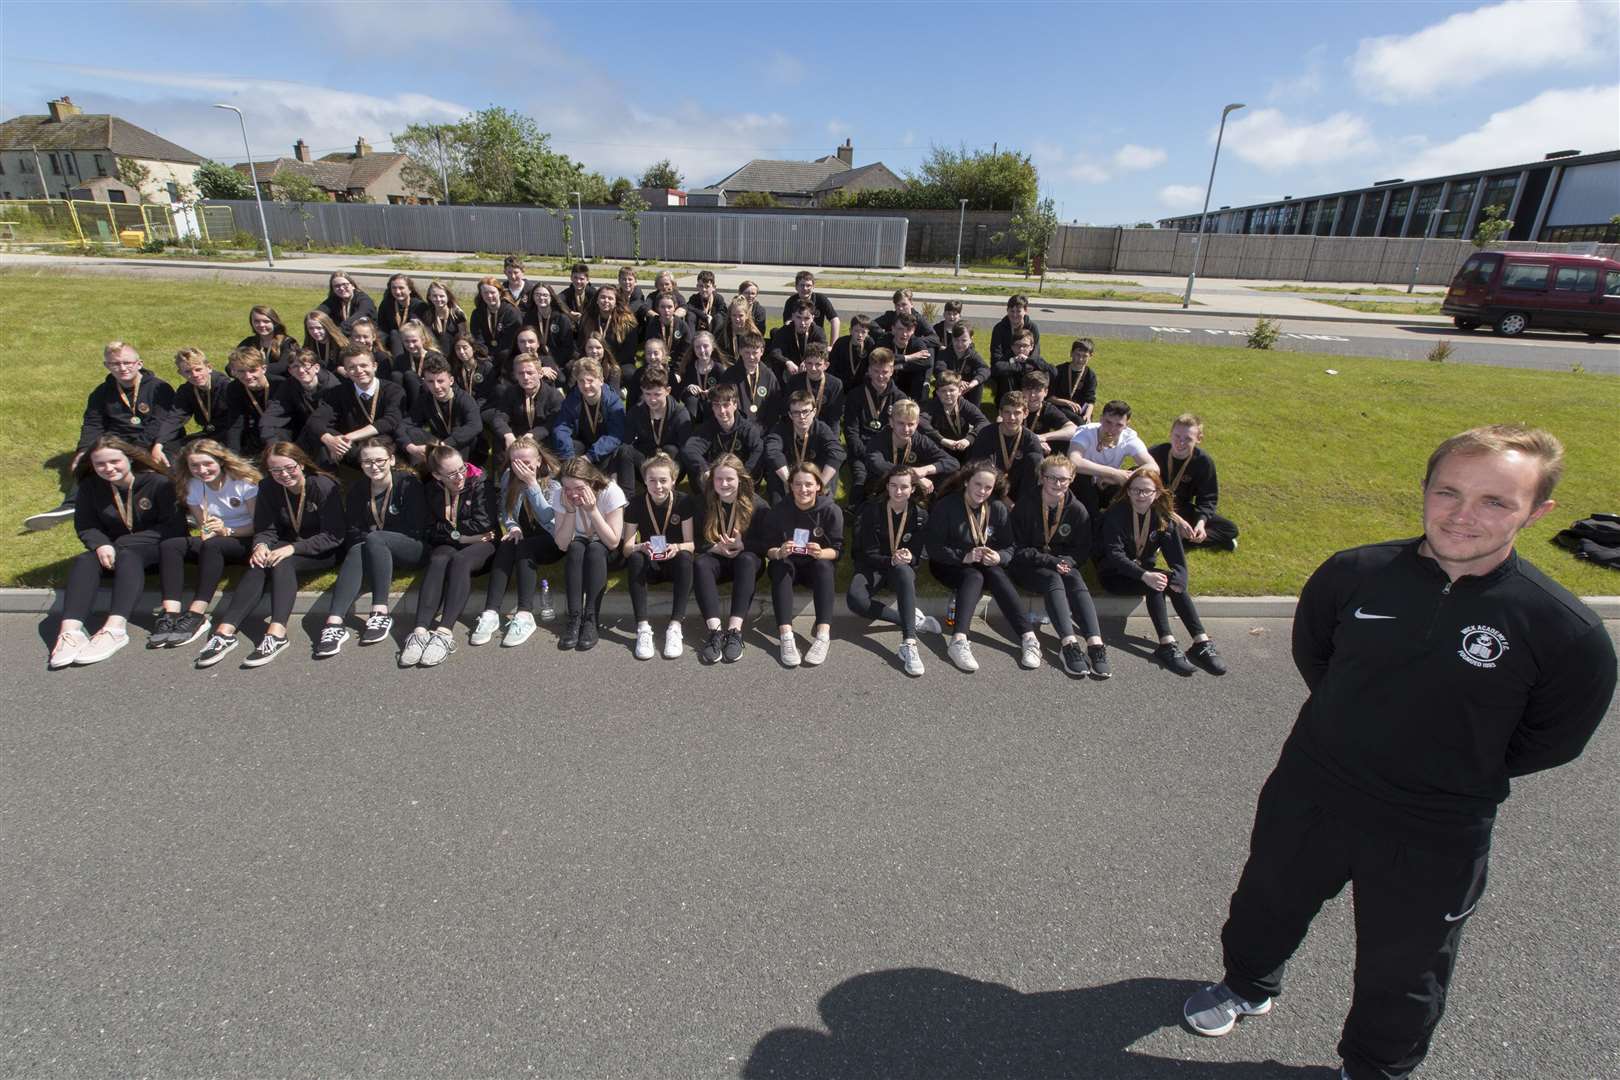 Wick High School sports medal winners pose for the camera before breaking up for the summer holidays. The awards were handed over by Wick Academy's Richard Macadie (foreground). Picture: Robert MacDonald / Northern Studios